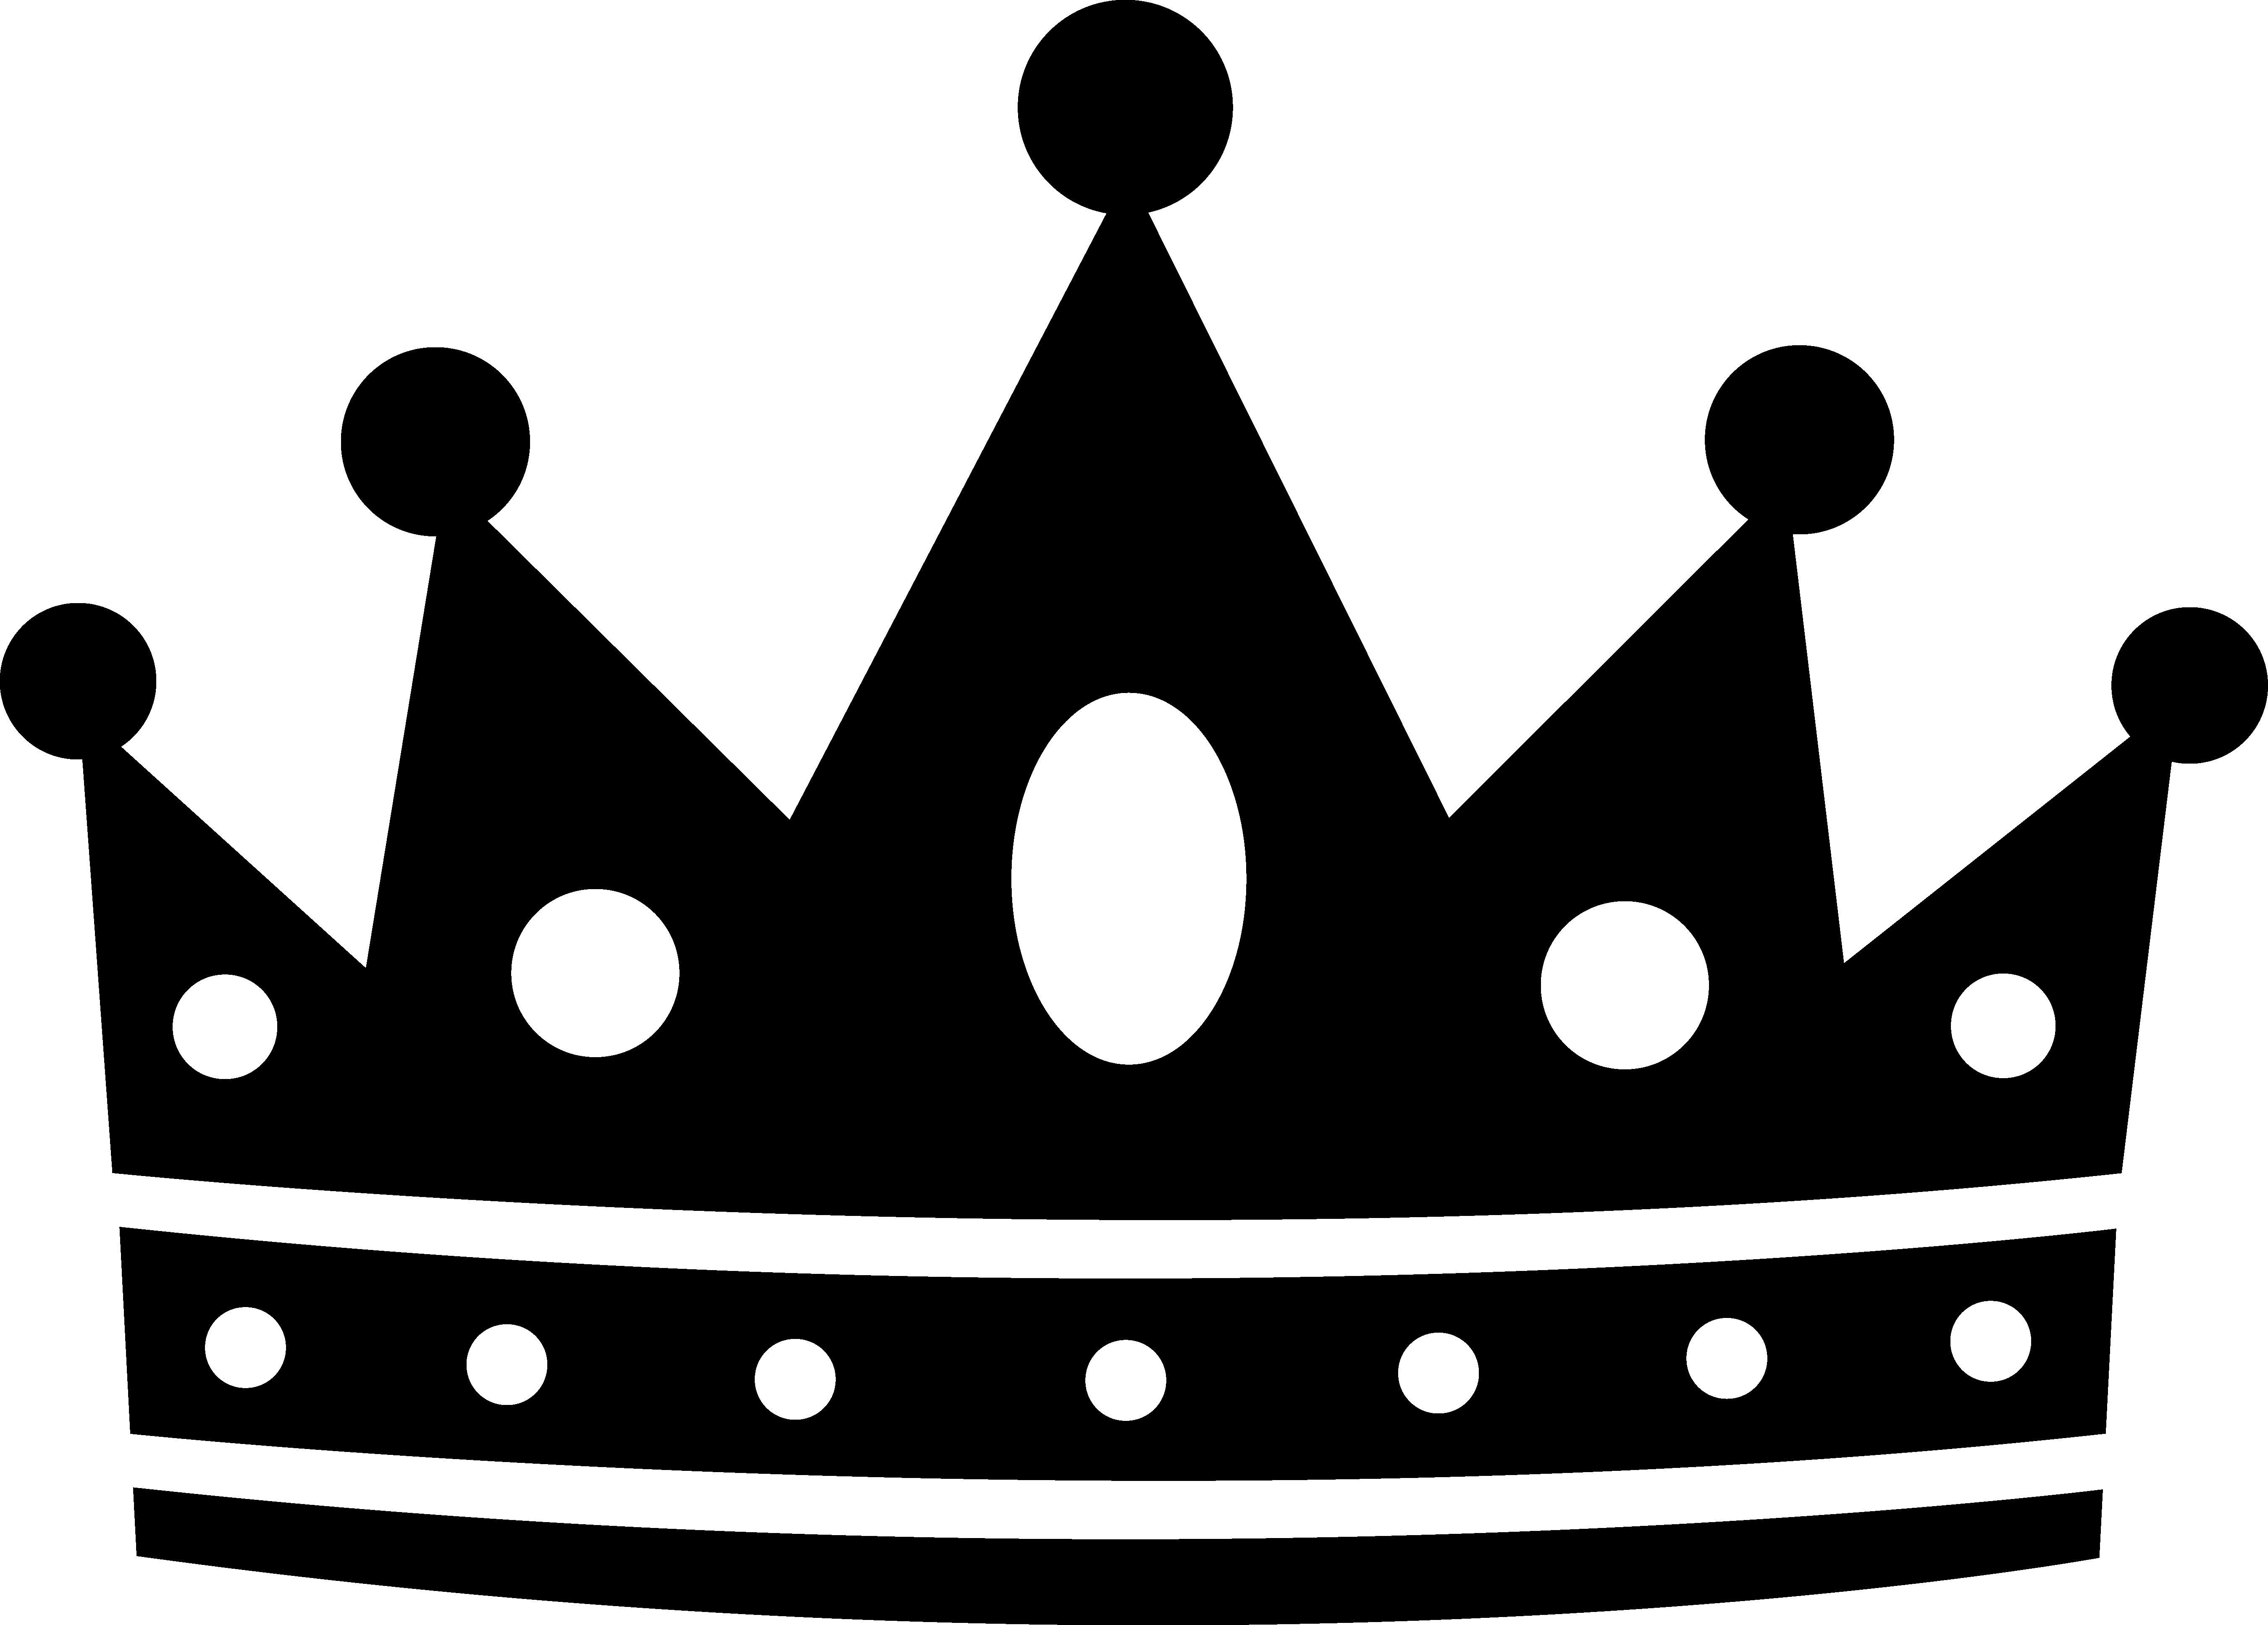 Free king crown download. Worm clipart evil